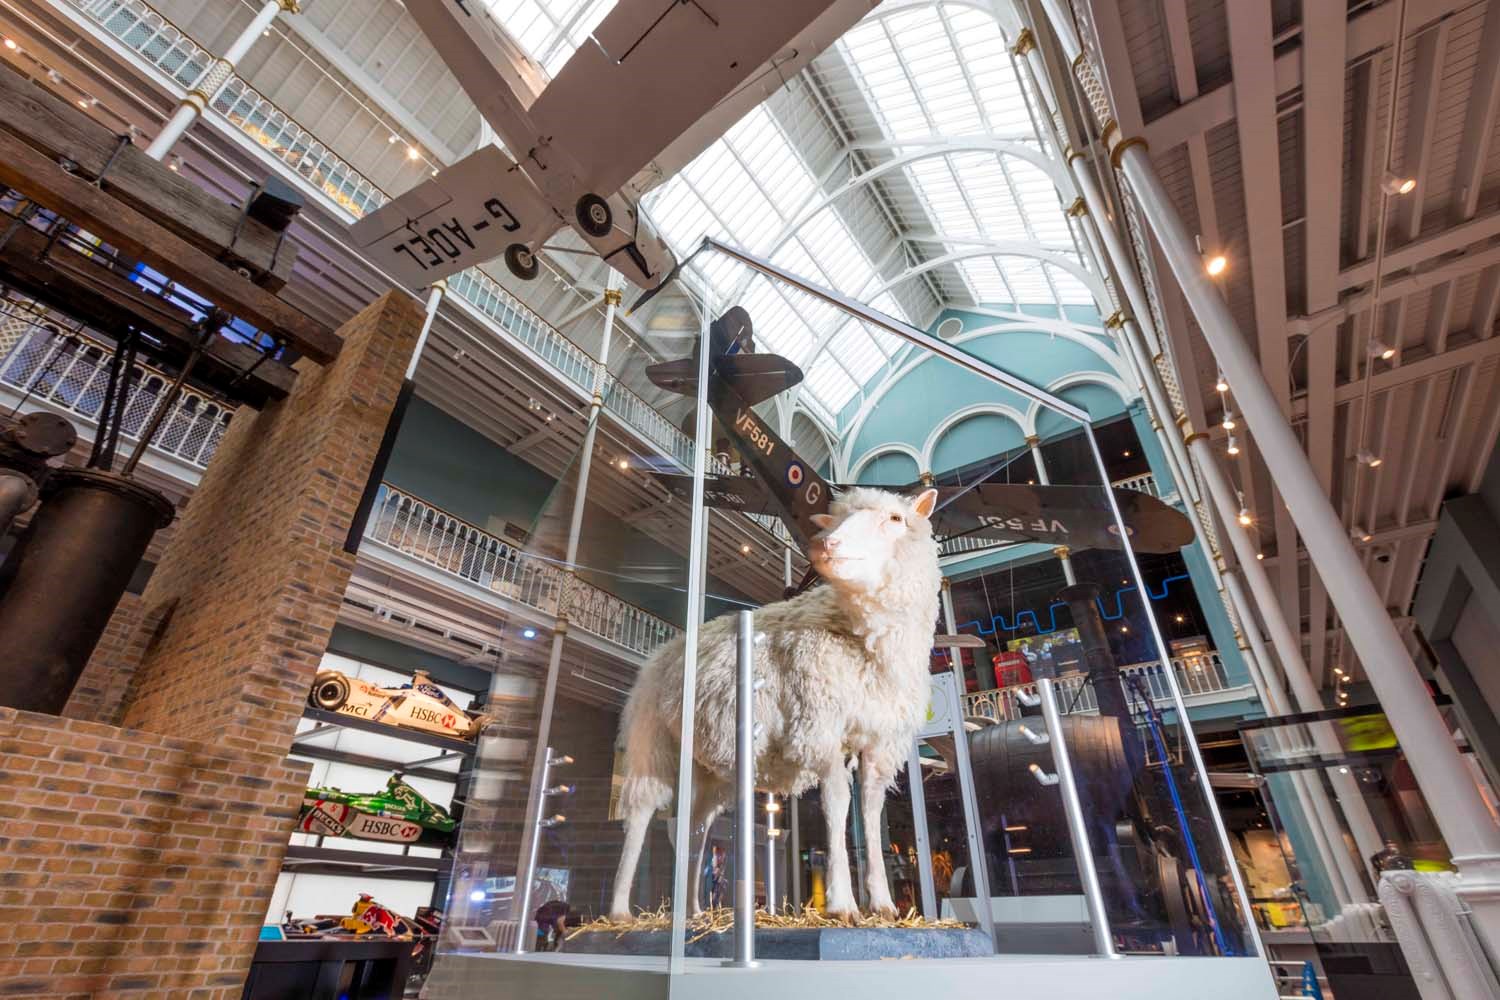 Dolly the sheep in a glass case surrounded by vehicle displays in the Science and Technology galleries. 